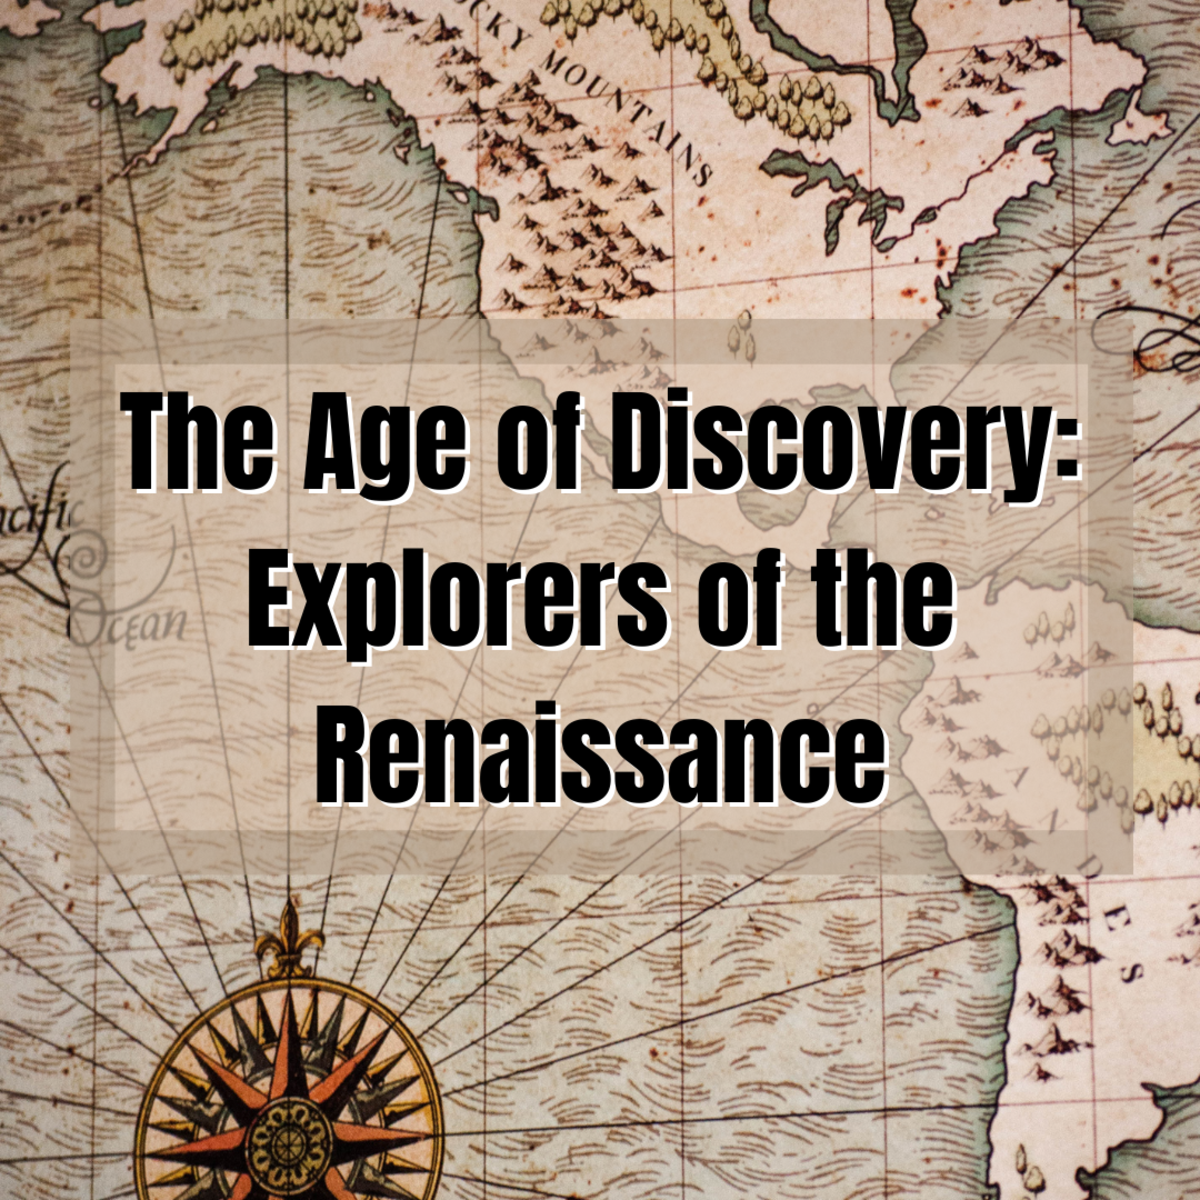 Read on to learn all about six of the most important explorers of the Age of Discovery, including Ferdinand Magellan and Marco Pollo.